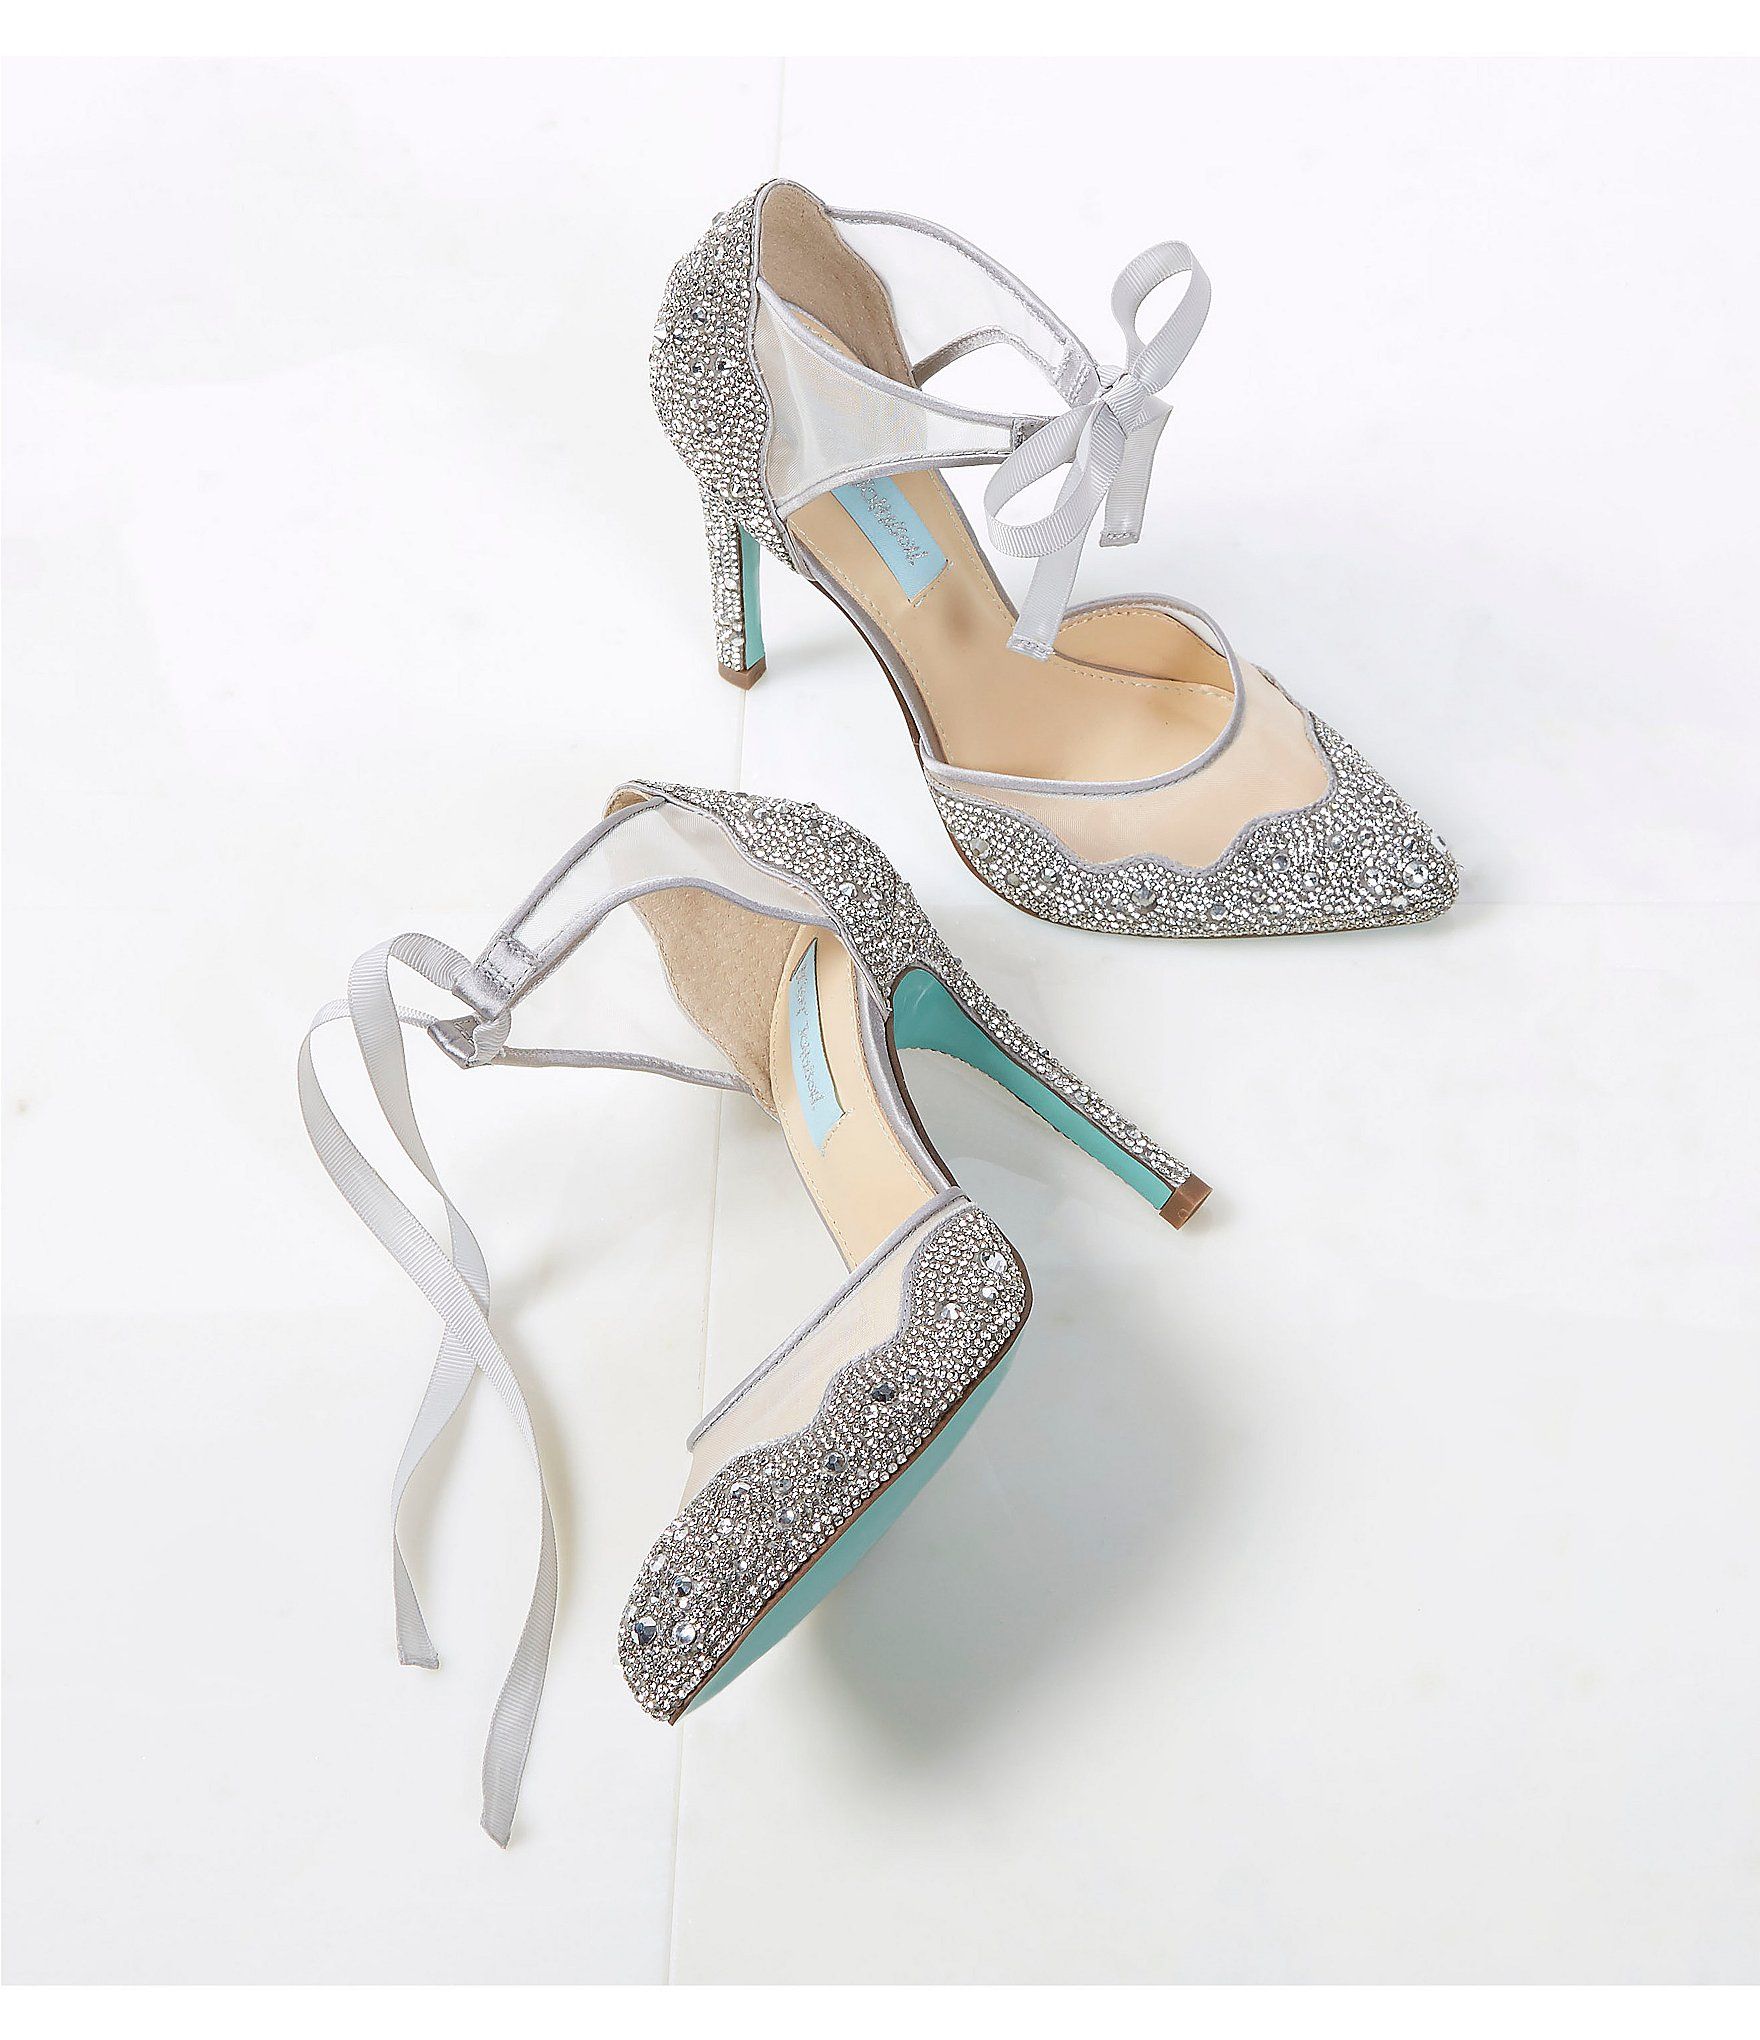 20 Wedding Shoes You’ll Love